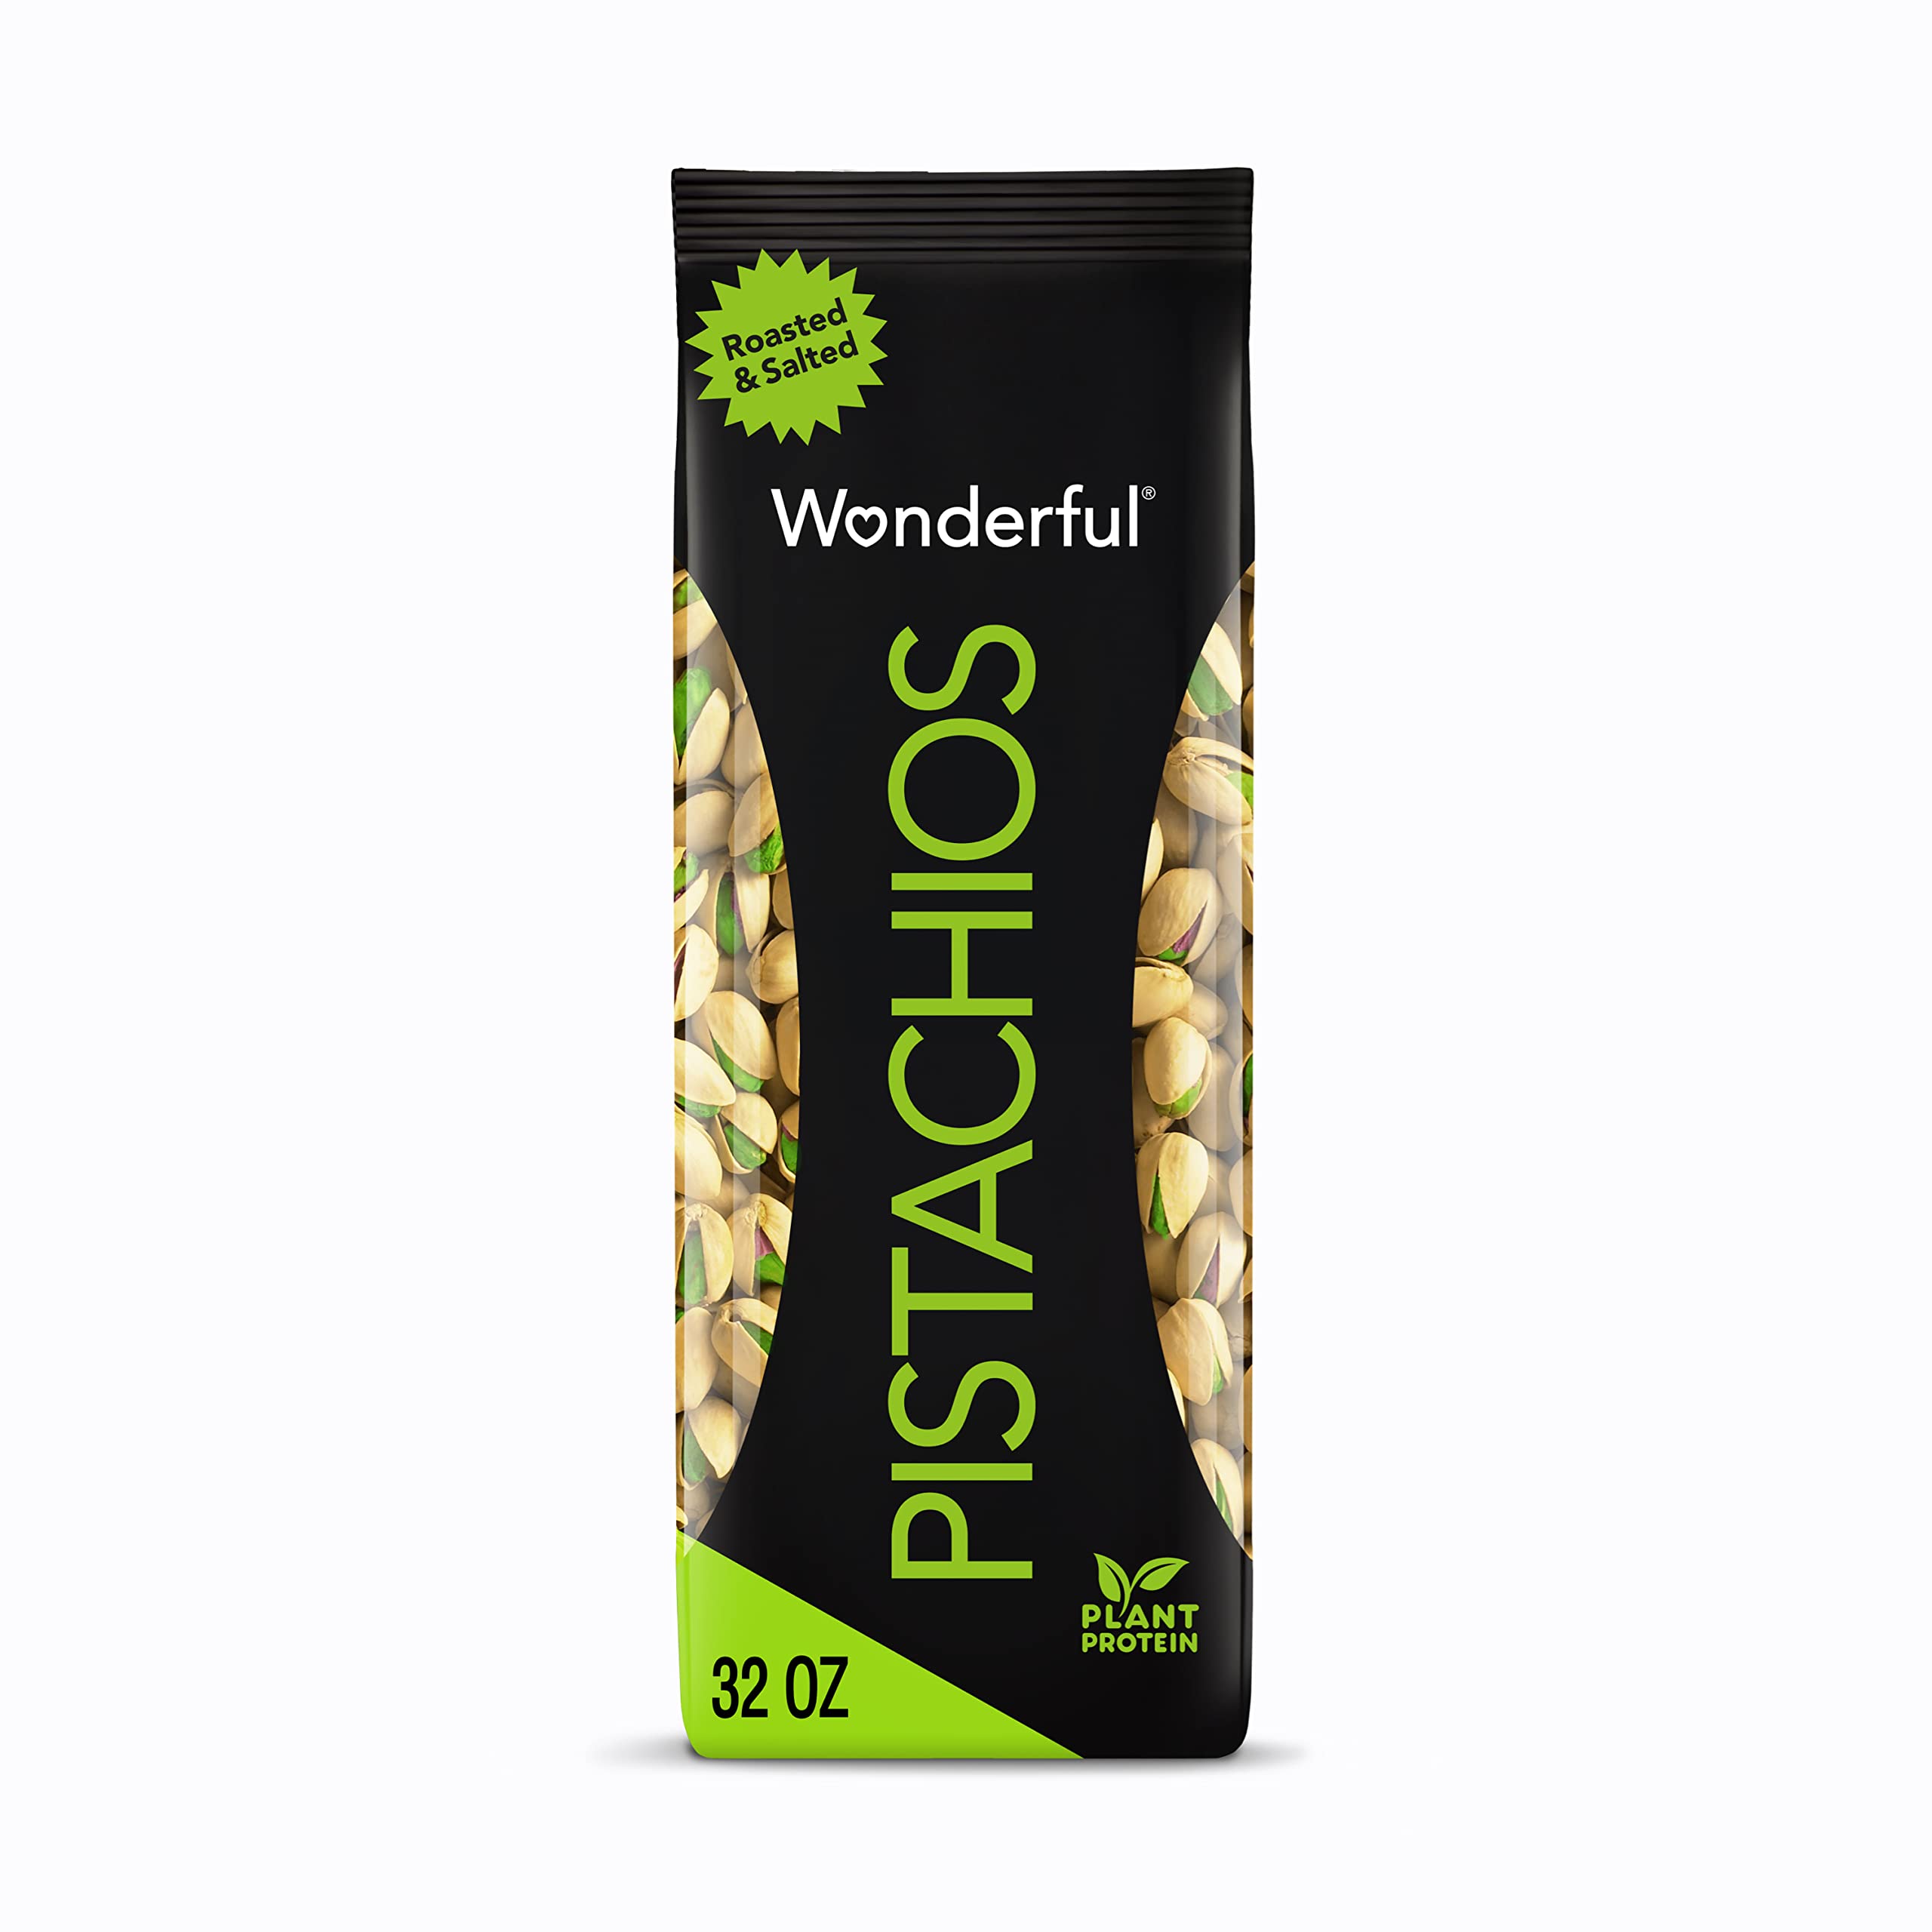 Wonderful Pistachios In Shell, Roasted and Salted Nuts - 32 Ounce Bag, Healthy Snack, Protein Snack, Pantry Staple~$9.98 @ Amazon~Free Prime Shipping!